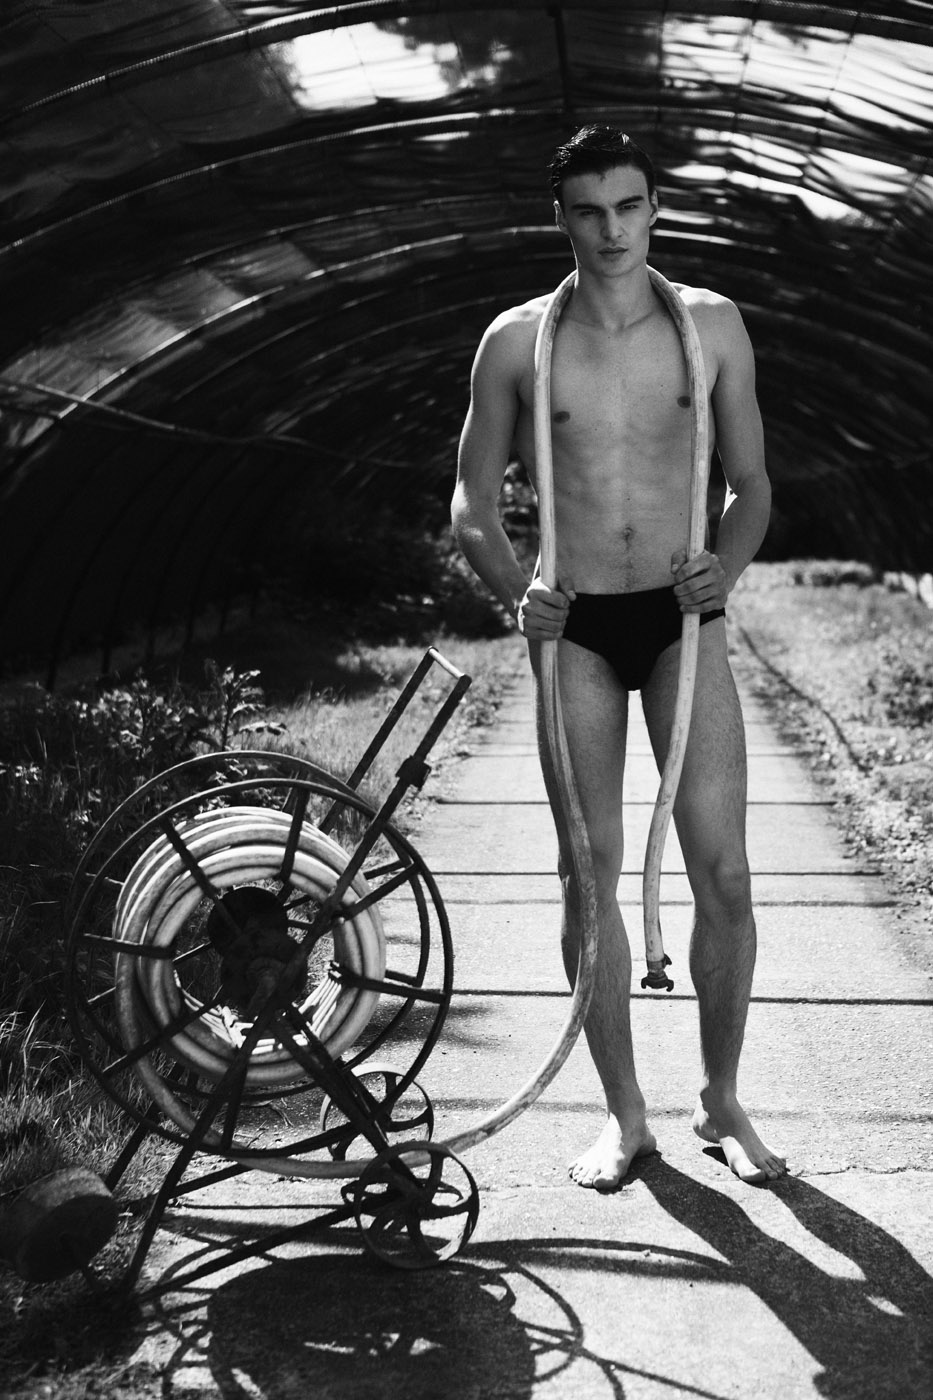 Thibault Gildas by Frederic Monceau for CHASSEUR MAGAZINE